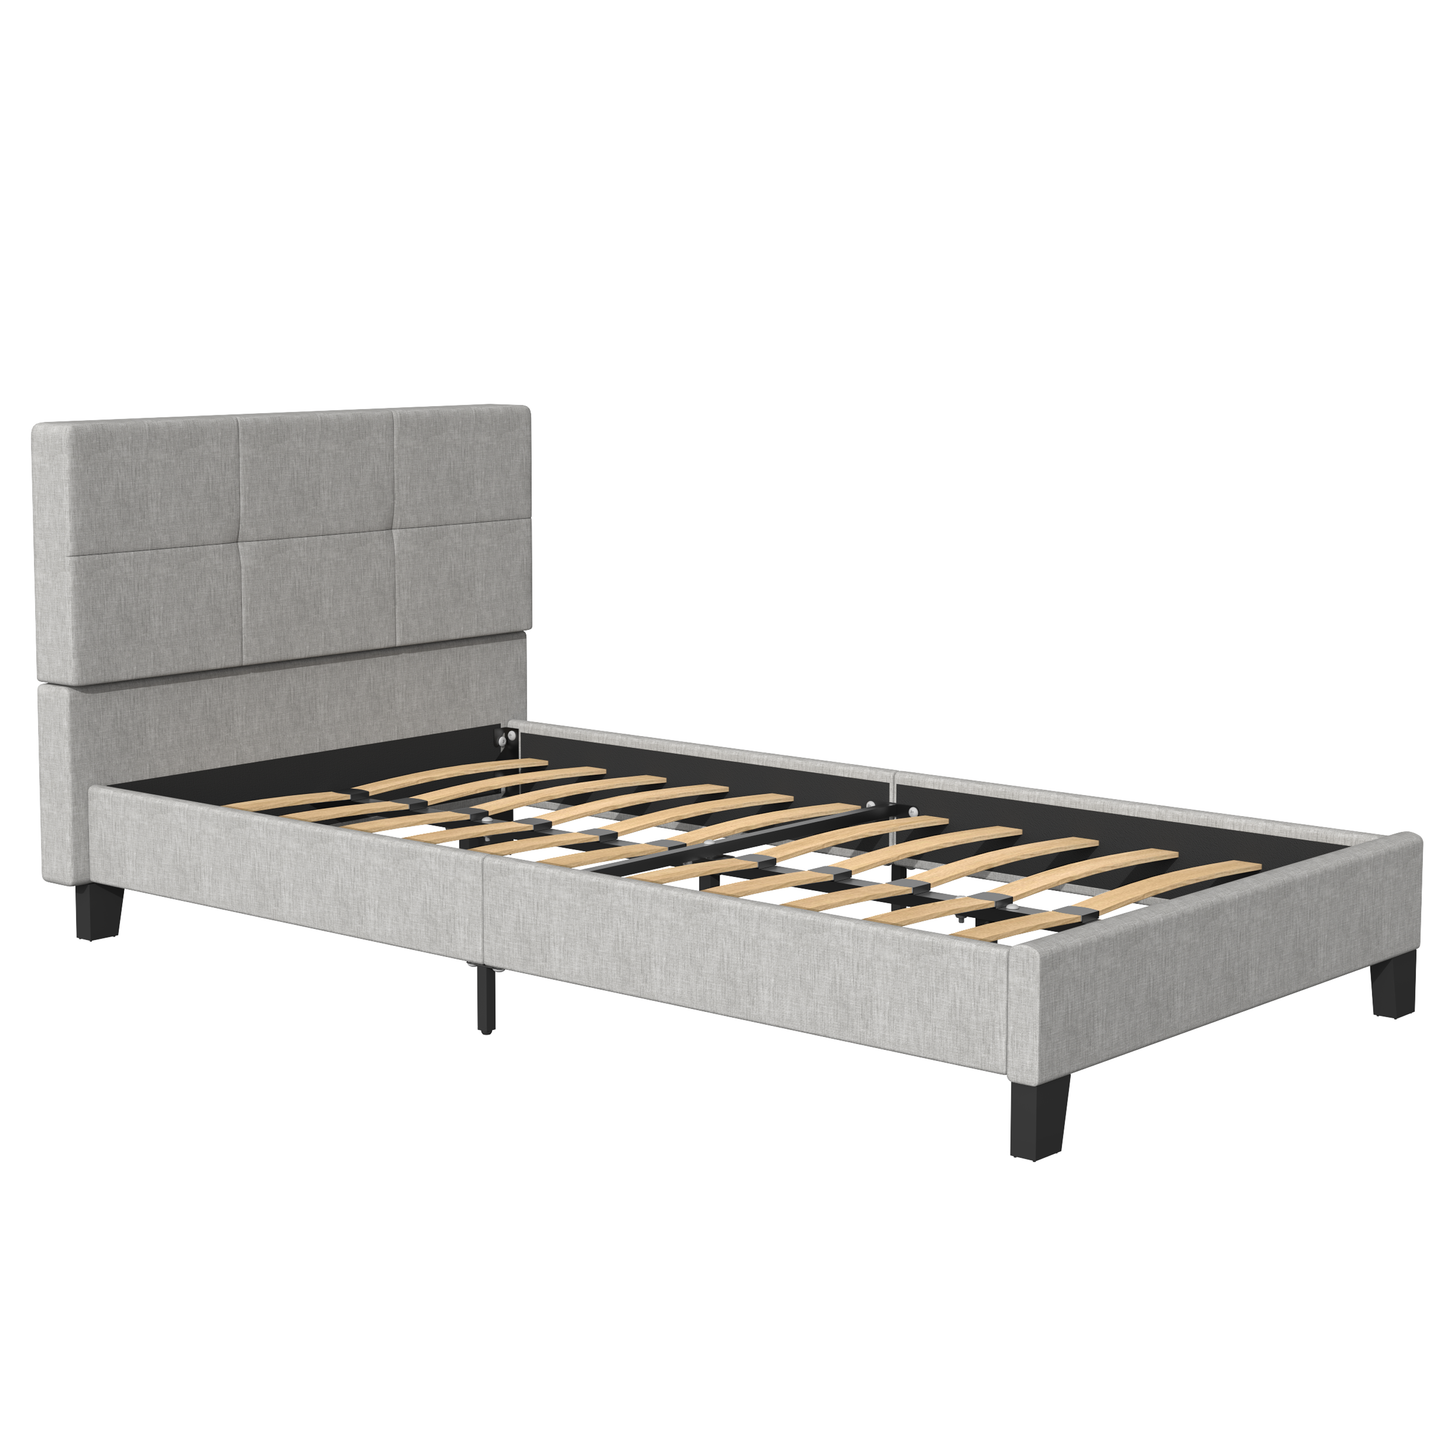 SYNGAR Twin Bed Frame, New Upgrade Twin Size Fabric Upholstered Platform Bed Frame with Height Adjustable Headboard, Bedroom Furniture Metal Frame Platform Bed Frame, No Box Spring Needed, Grey